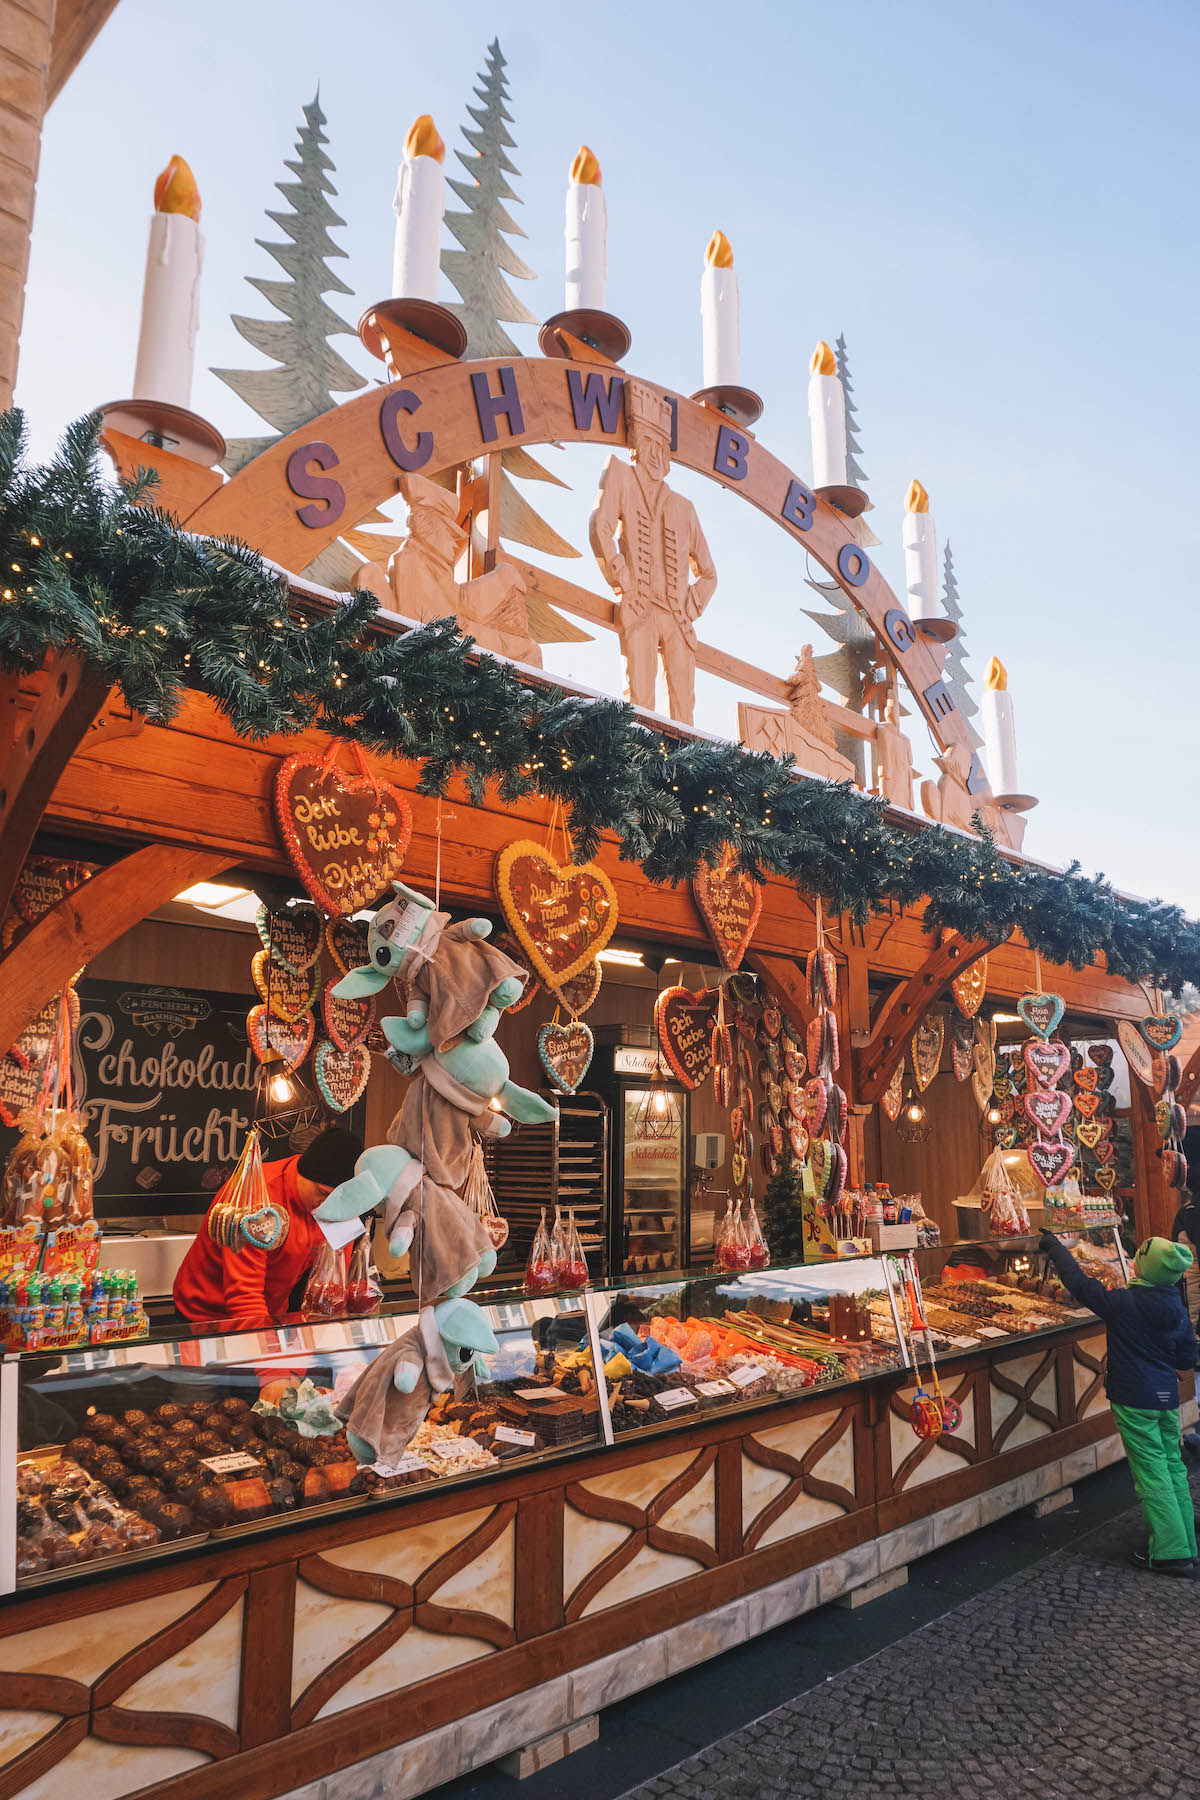 A bakery stall at the Bamberg, Germany Christmas Market